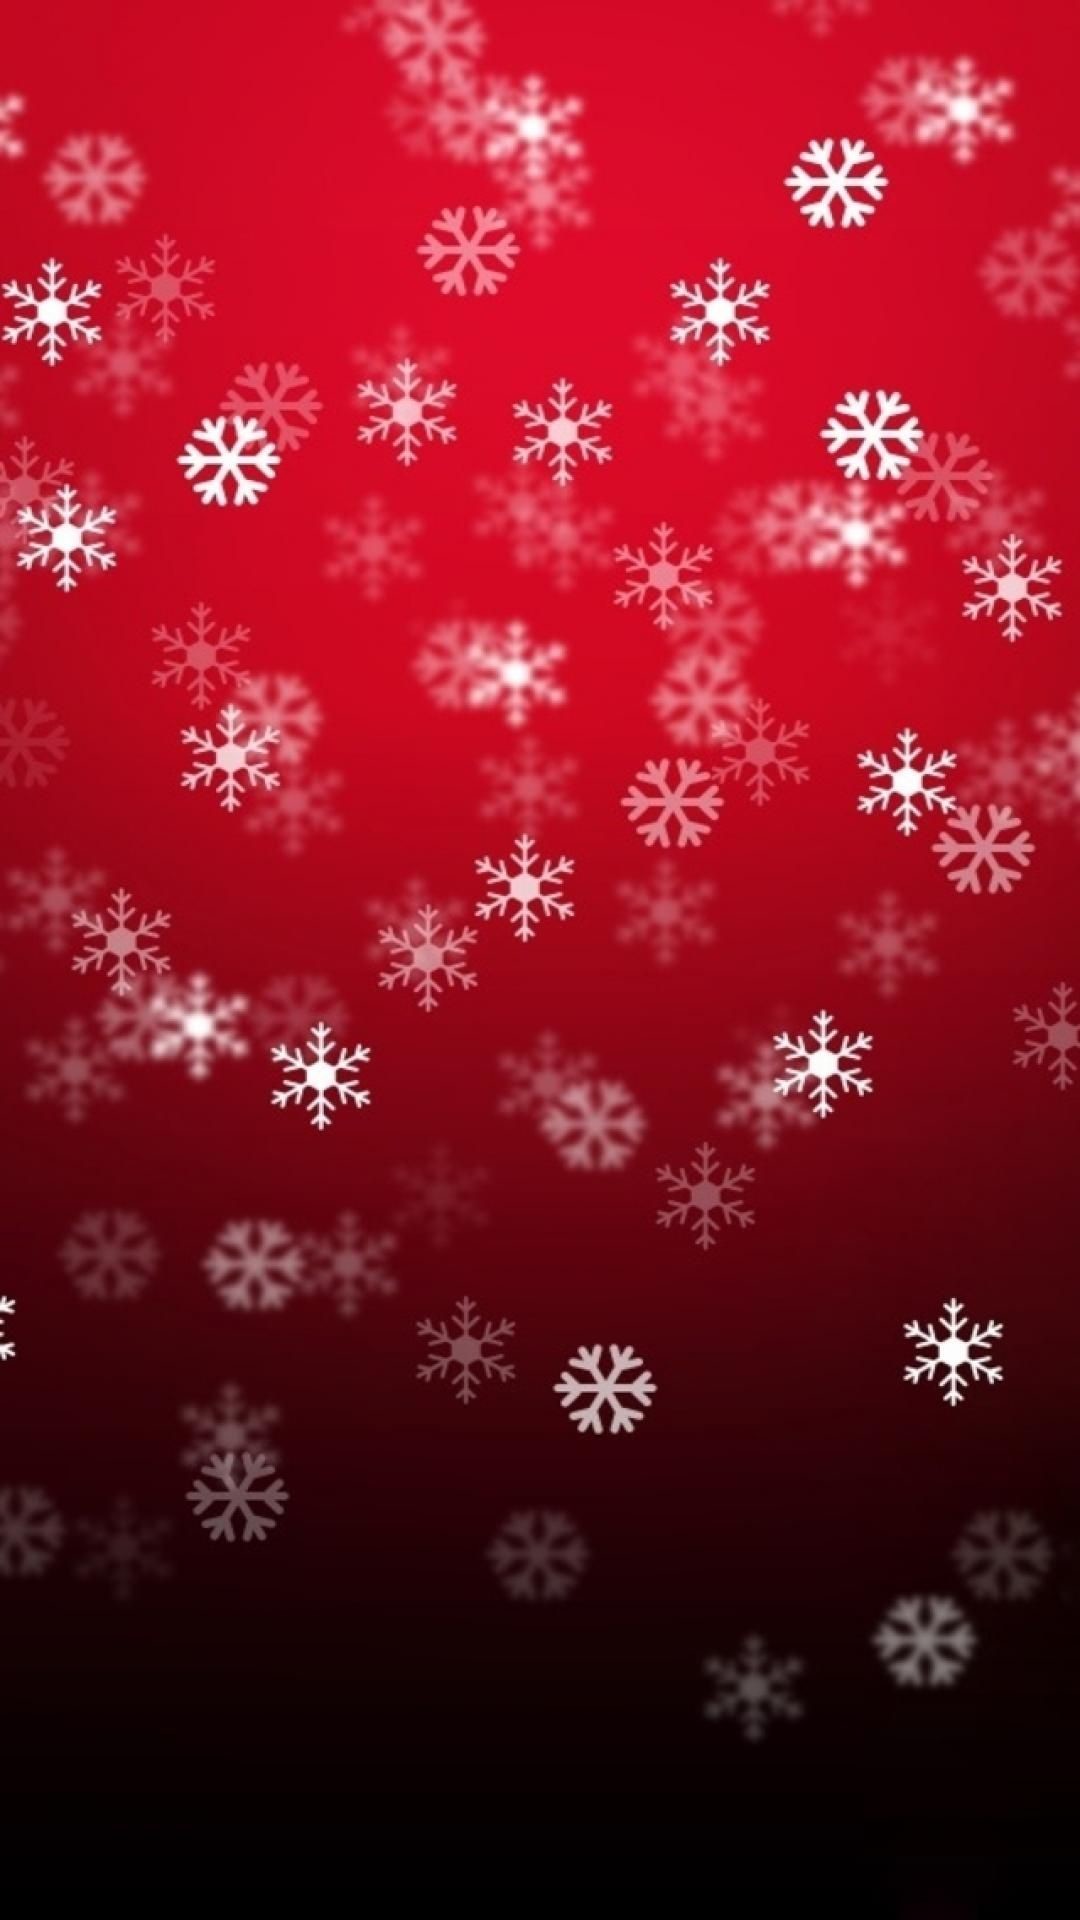 1080x1920 Snowflake Christmas Picture